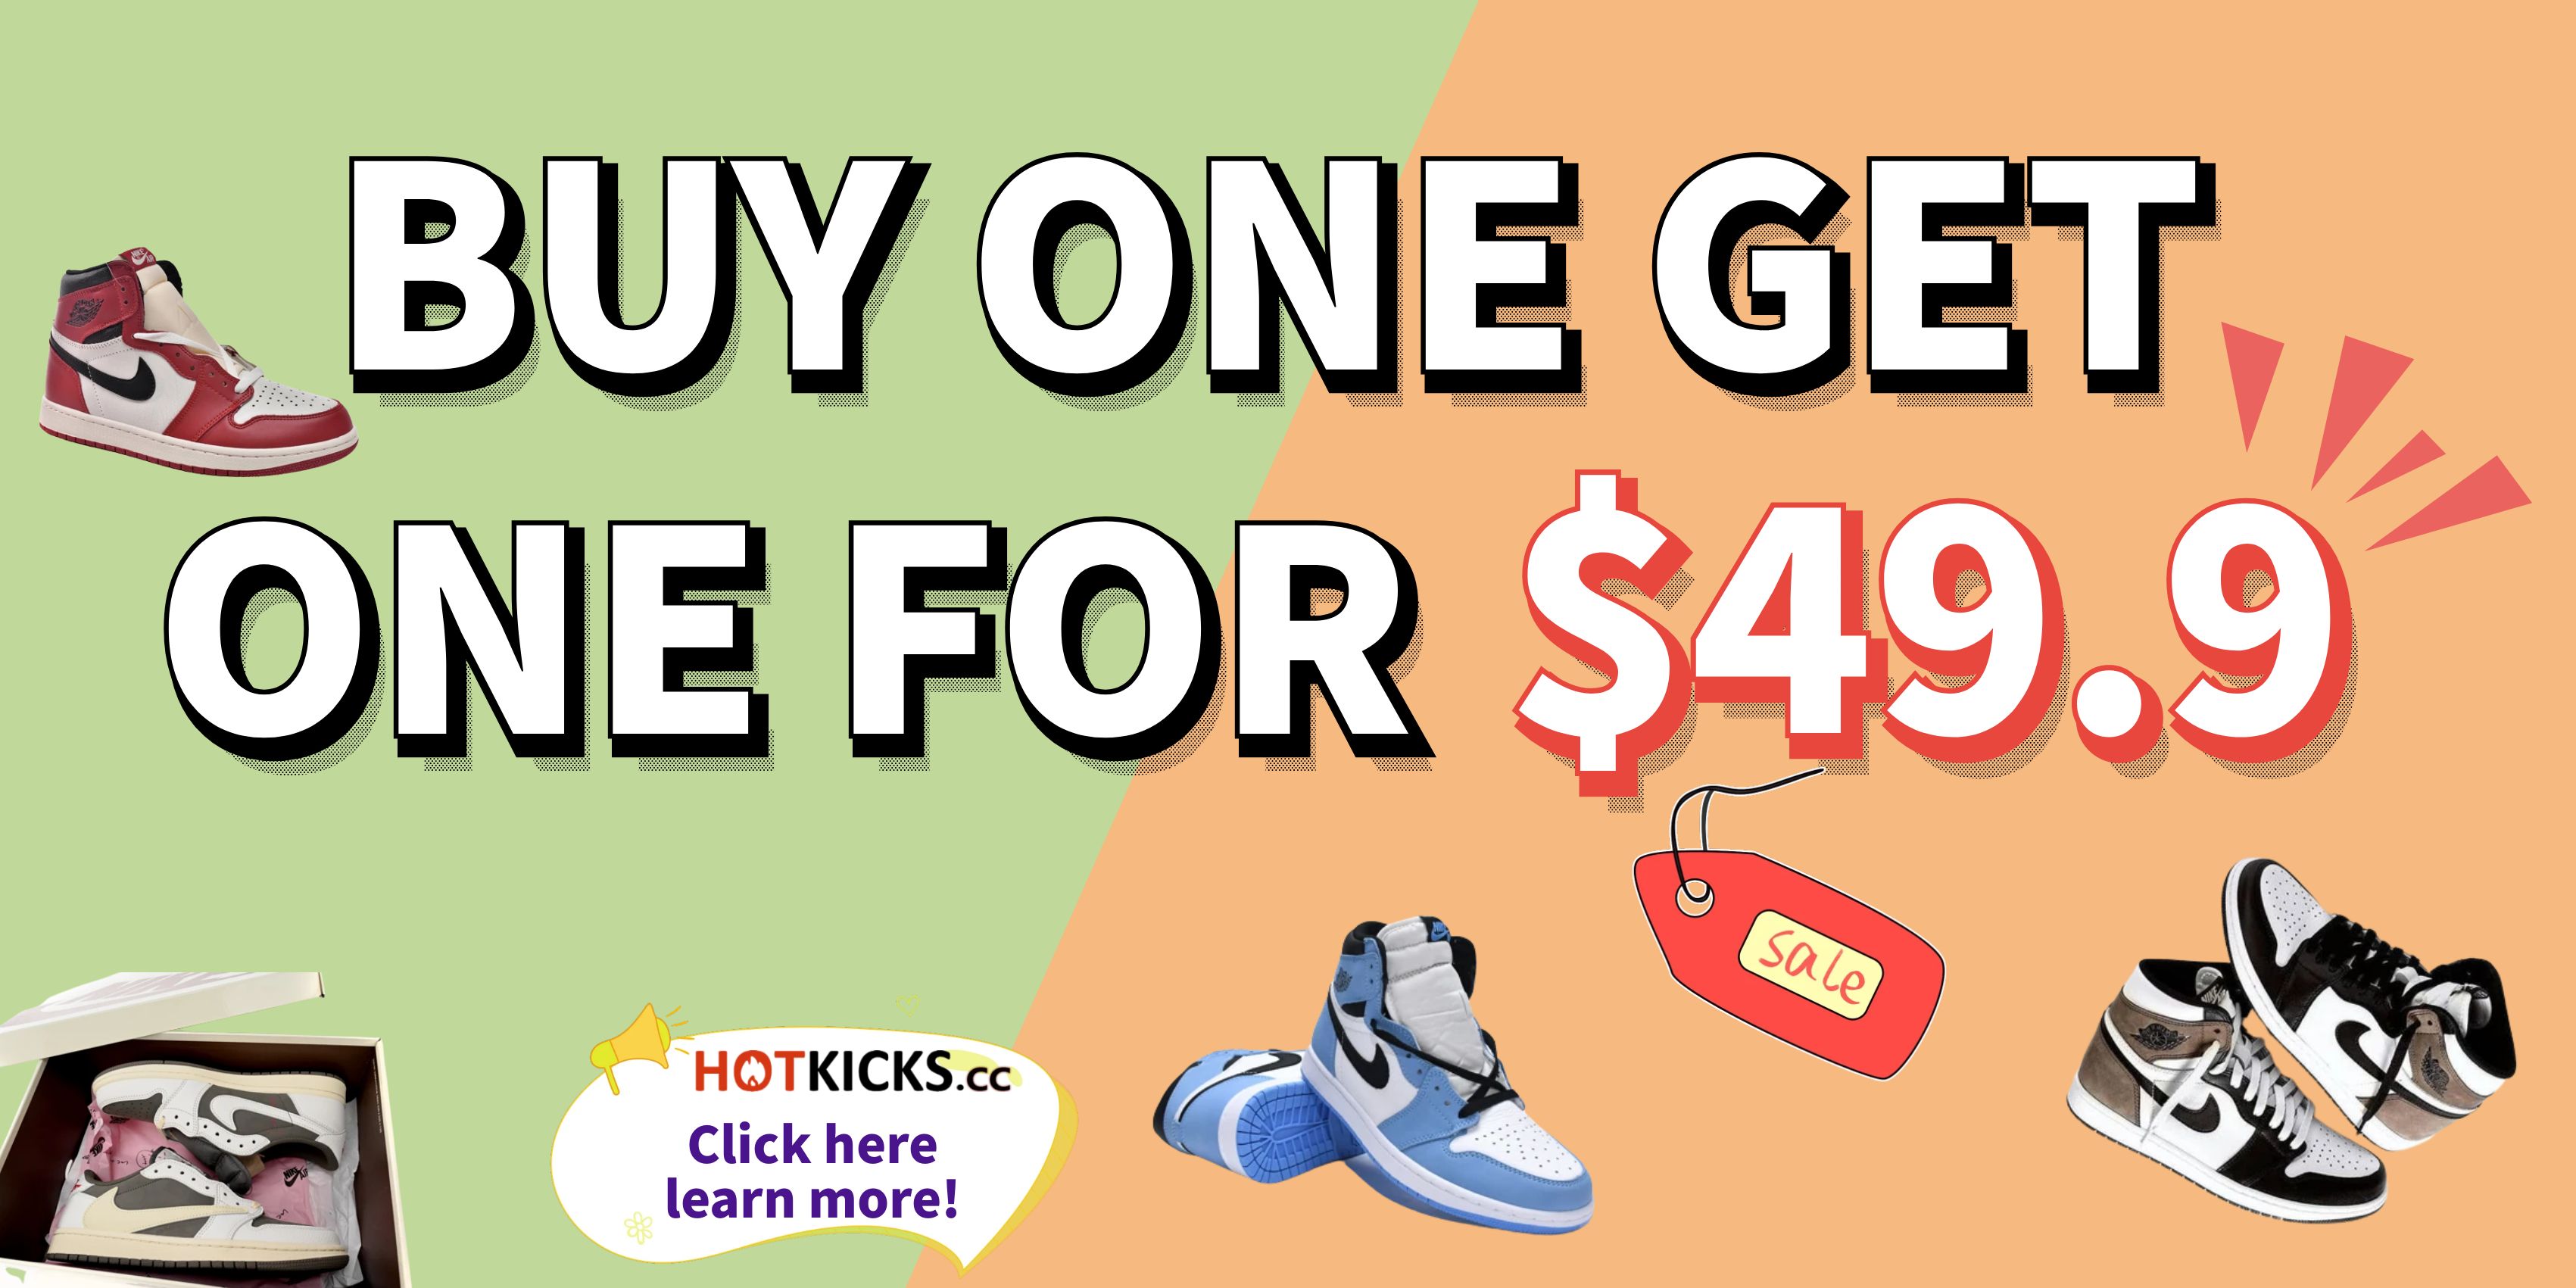 HOW TO get 49.9$ shoe from hotkicks